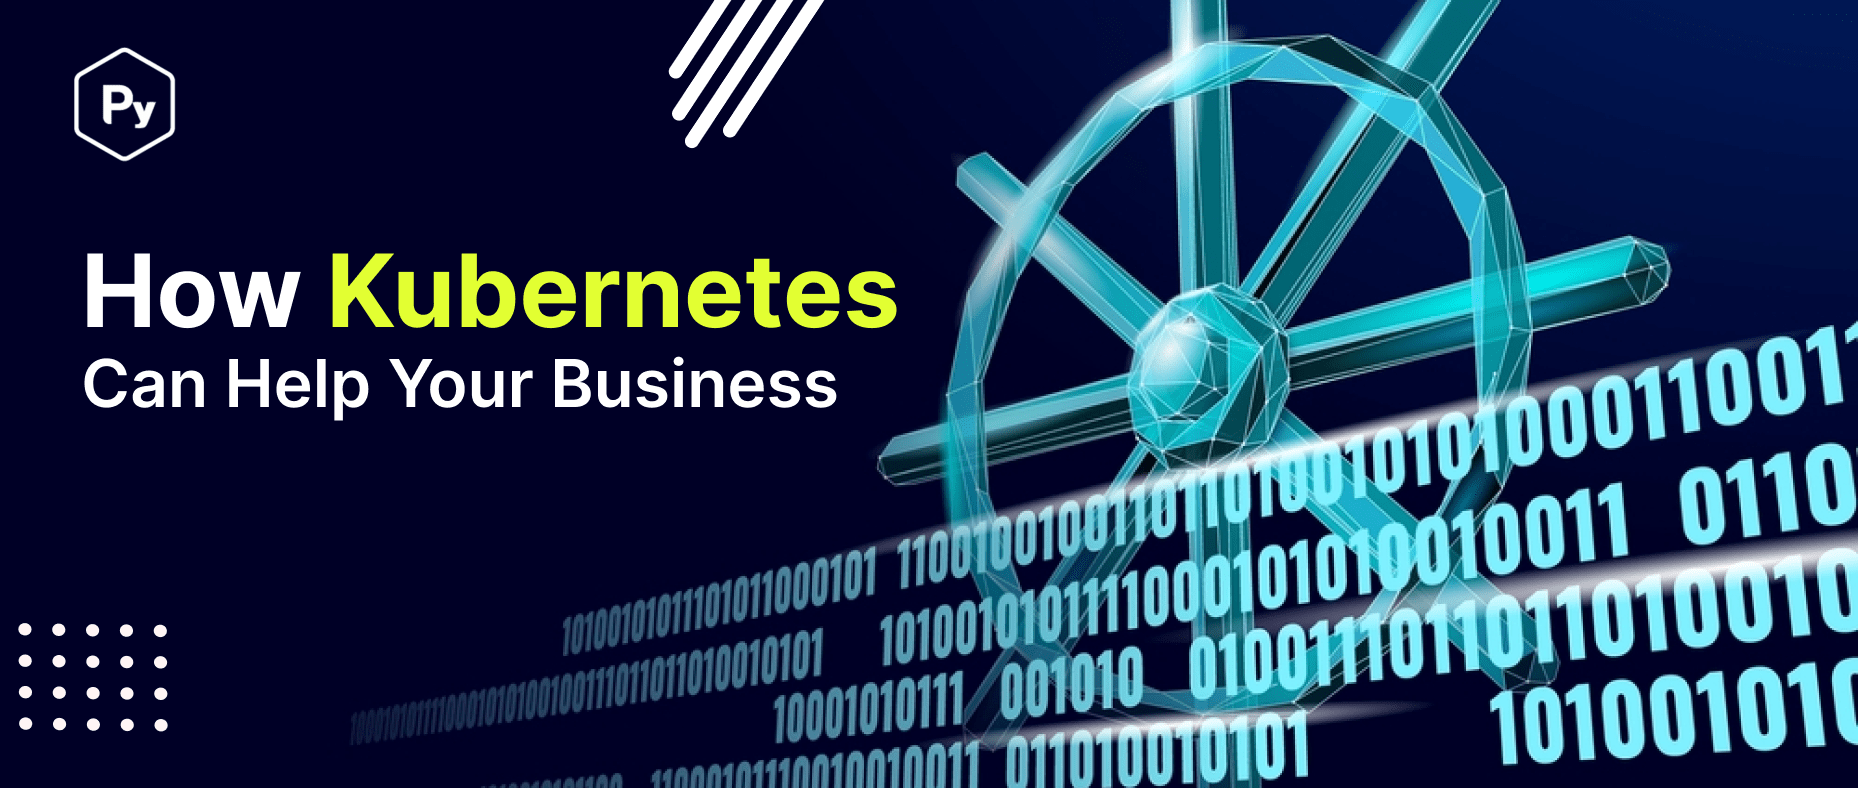 How Kubernetes Can Help Your Business pyzen technologies